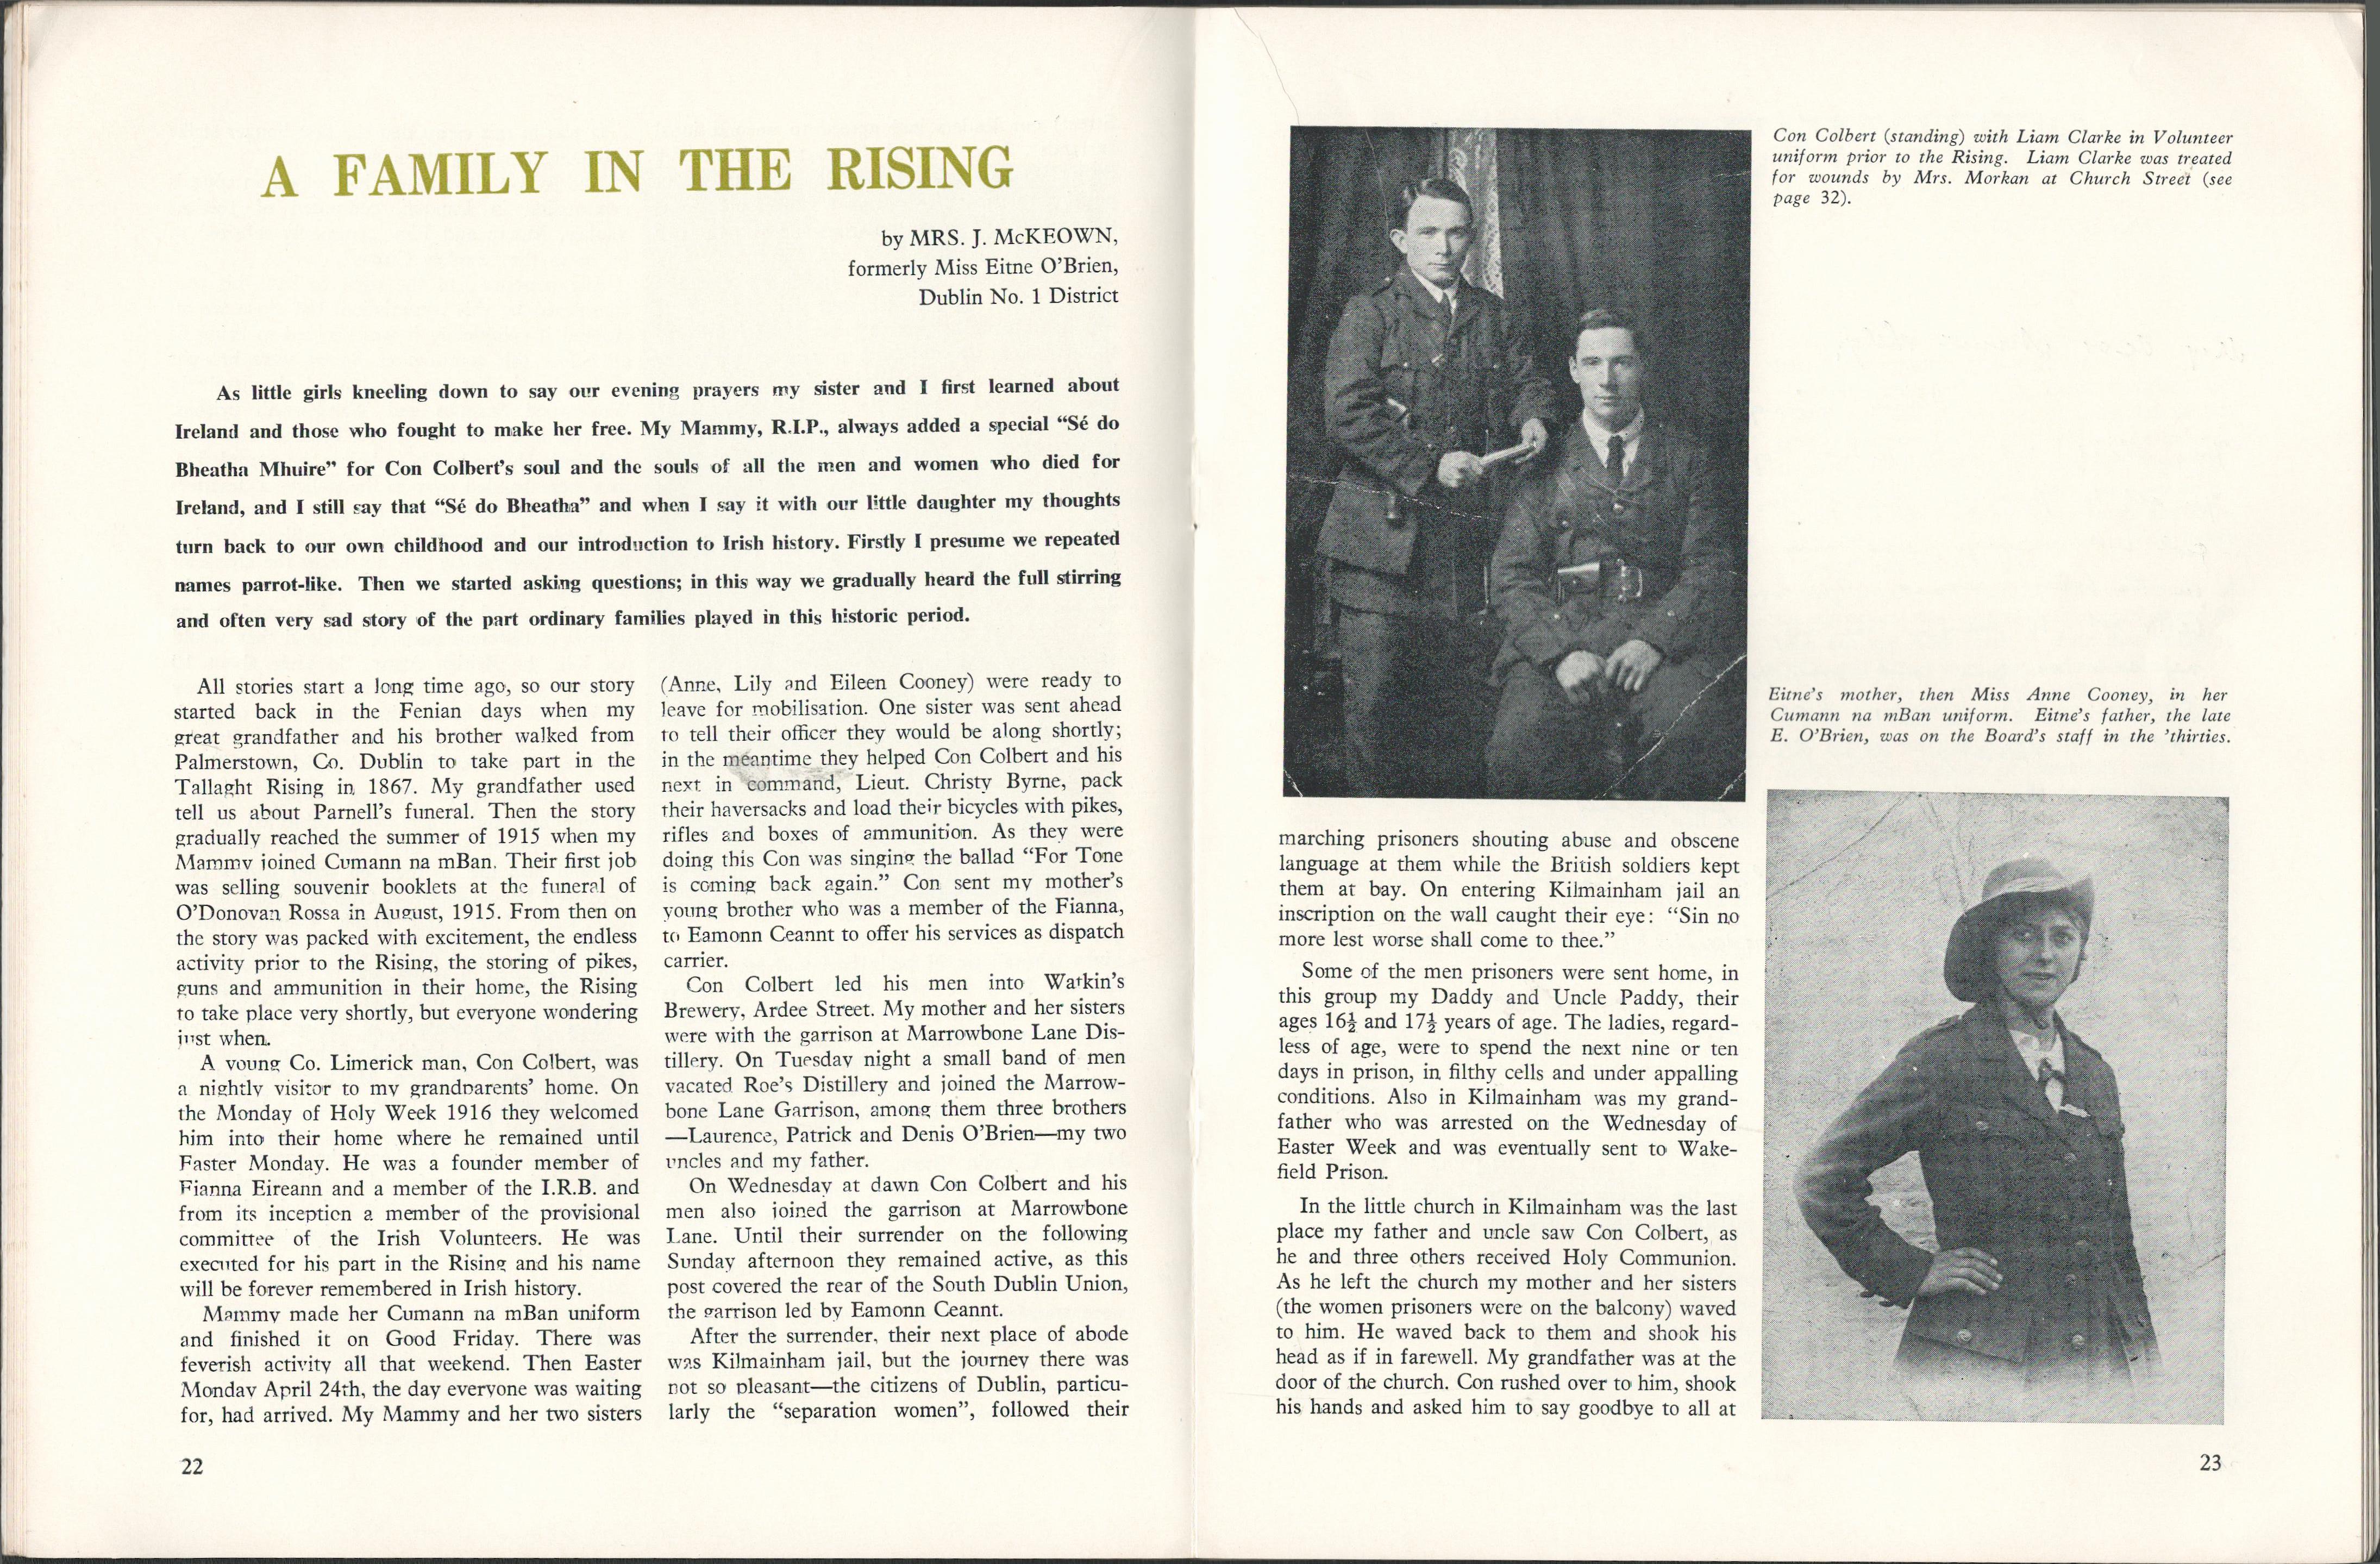 1966 Journal 50th Anniversary The Easter Rising 1916 - Image 5 of 9